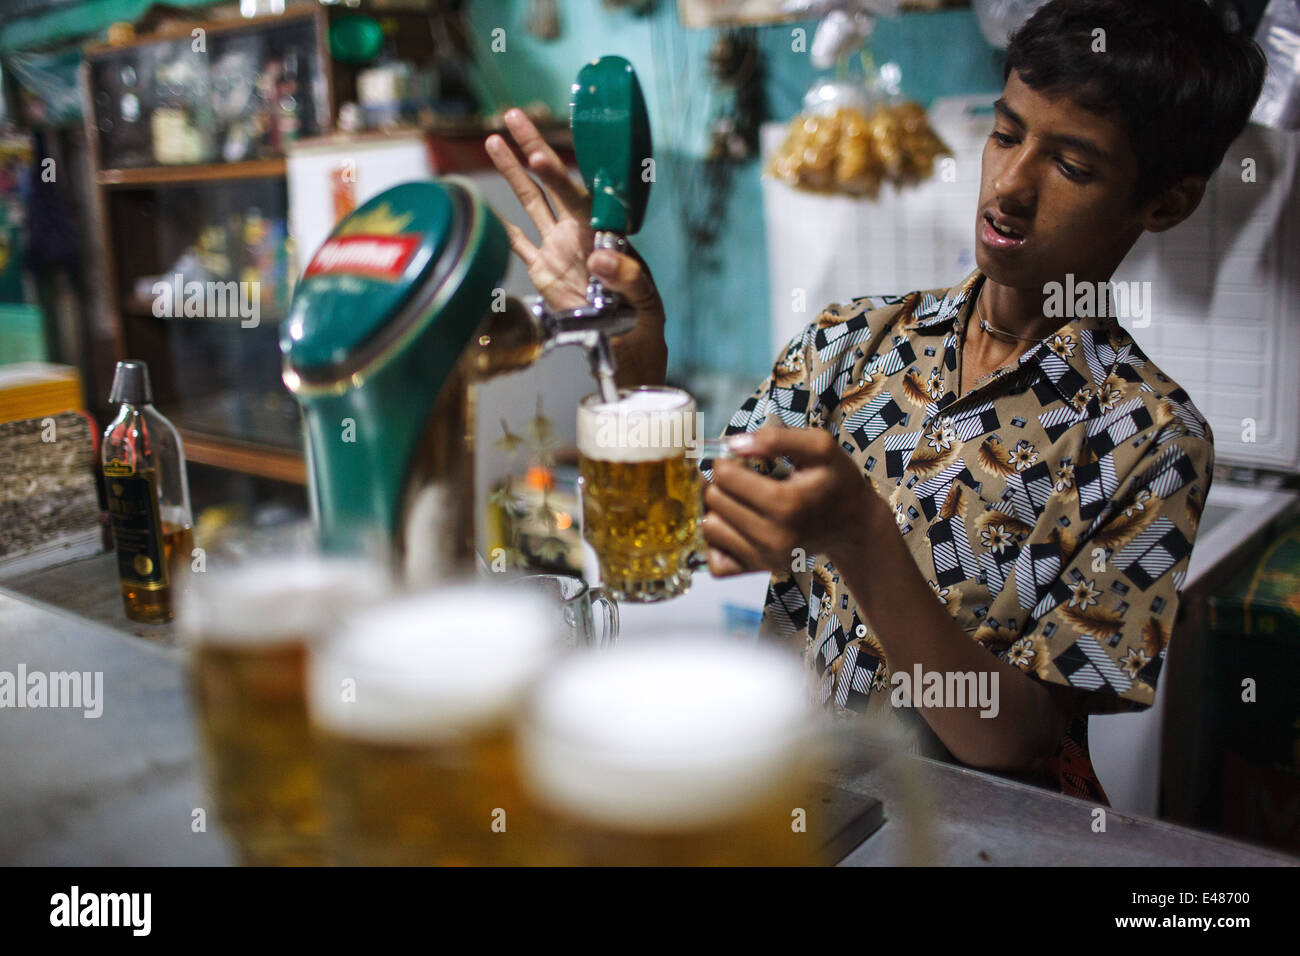 A young person pours Myanmar draft draught beer into glasses in a beer station (restaurant, bar) in Bago (Pegu), Myanmar (Burma) Stock Photo